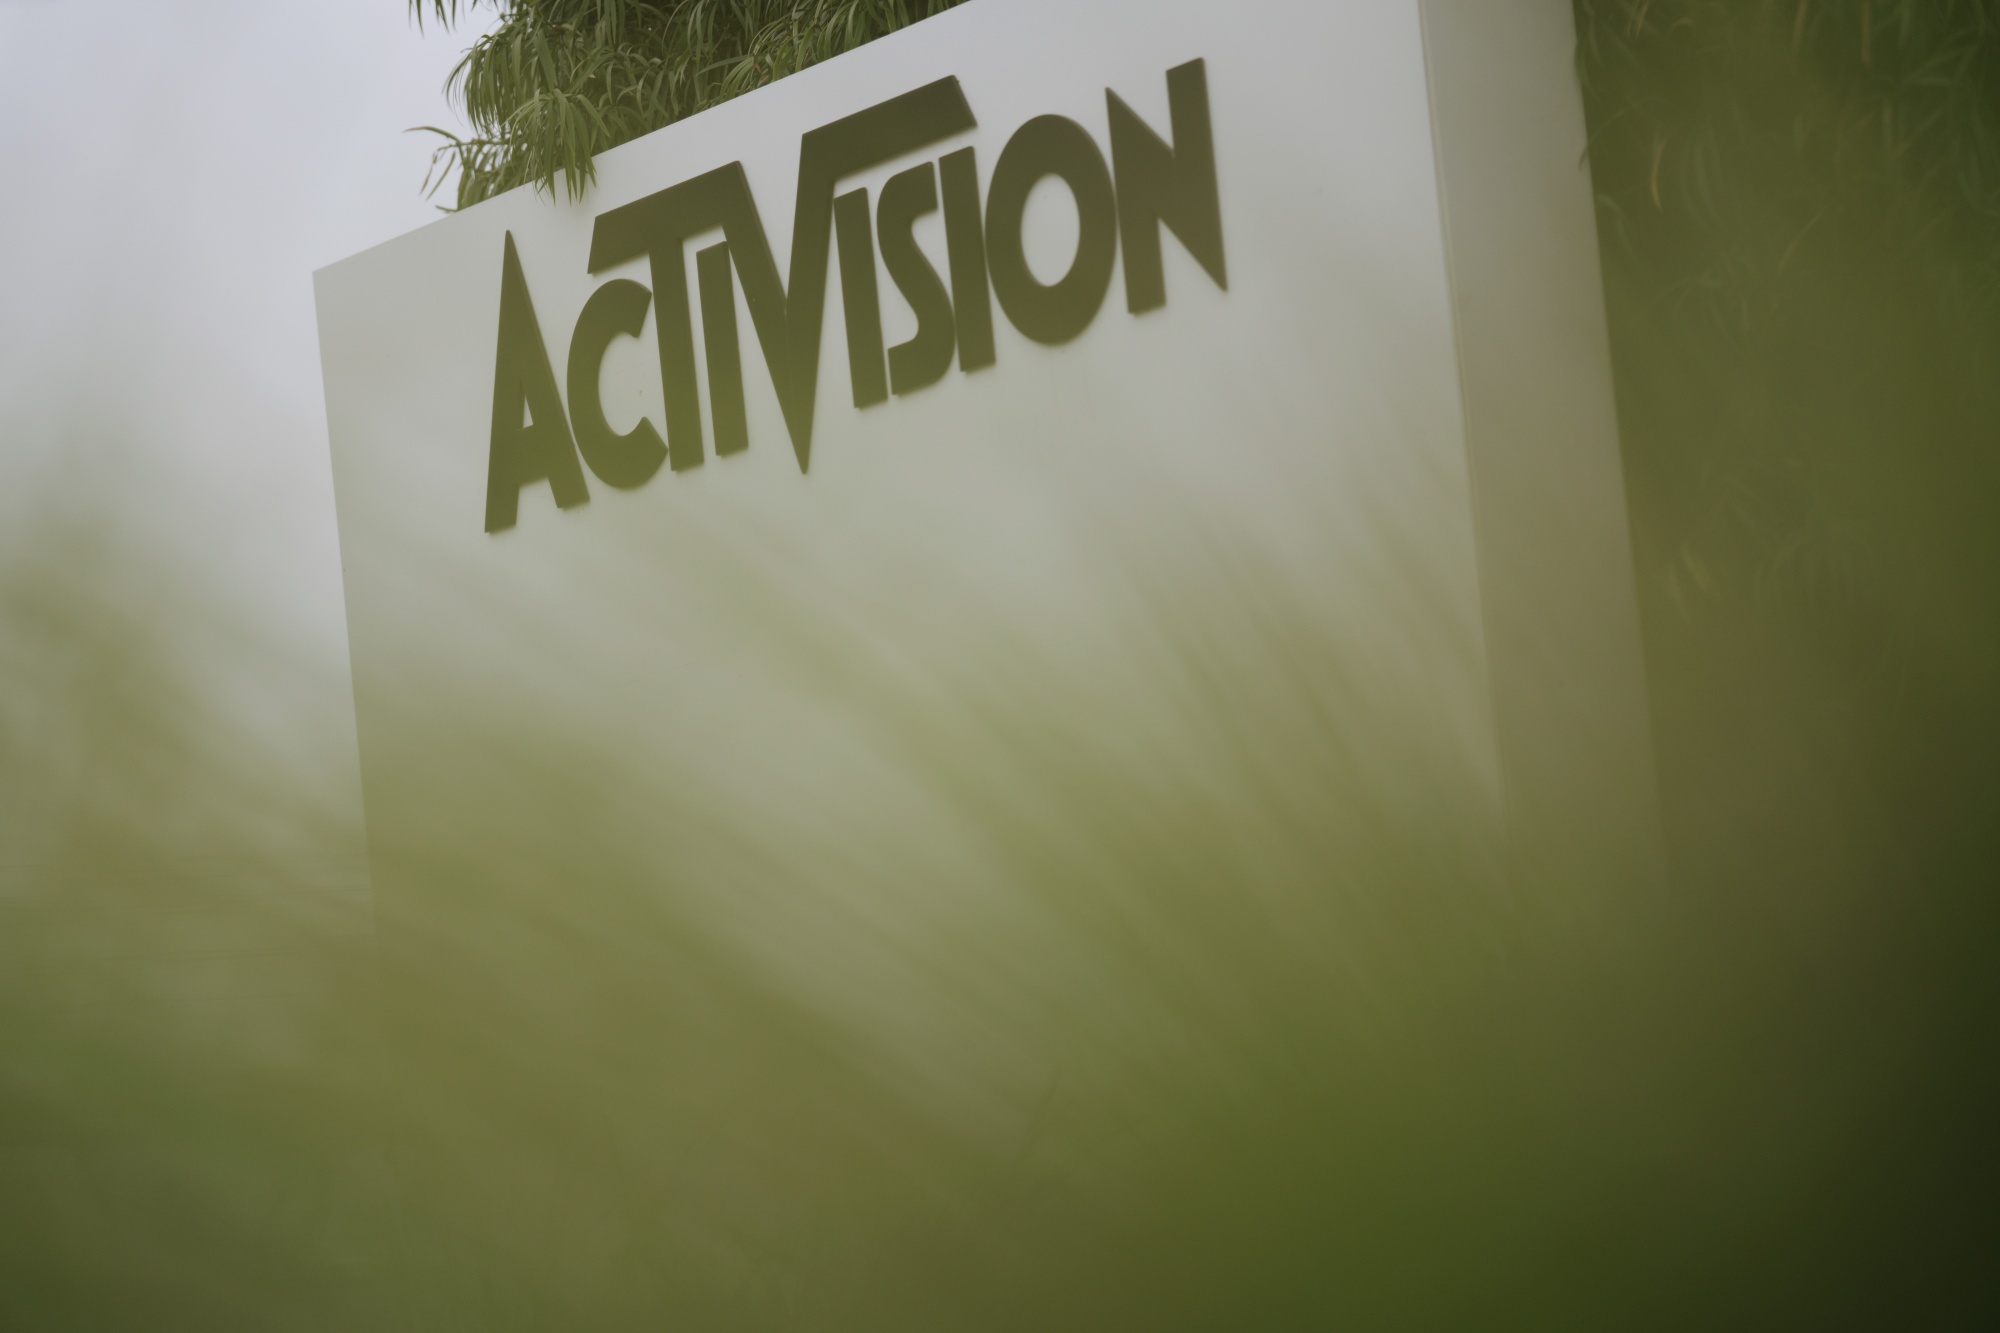 European Commission will reportedly approve Microsoft's Activision